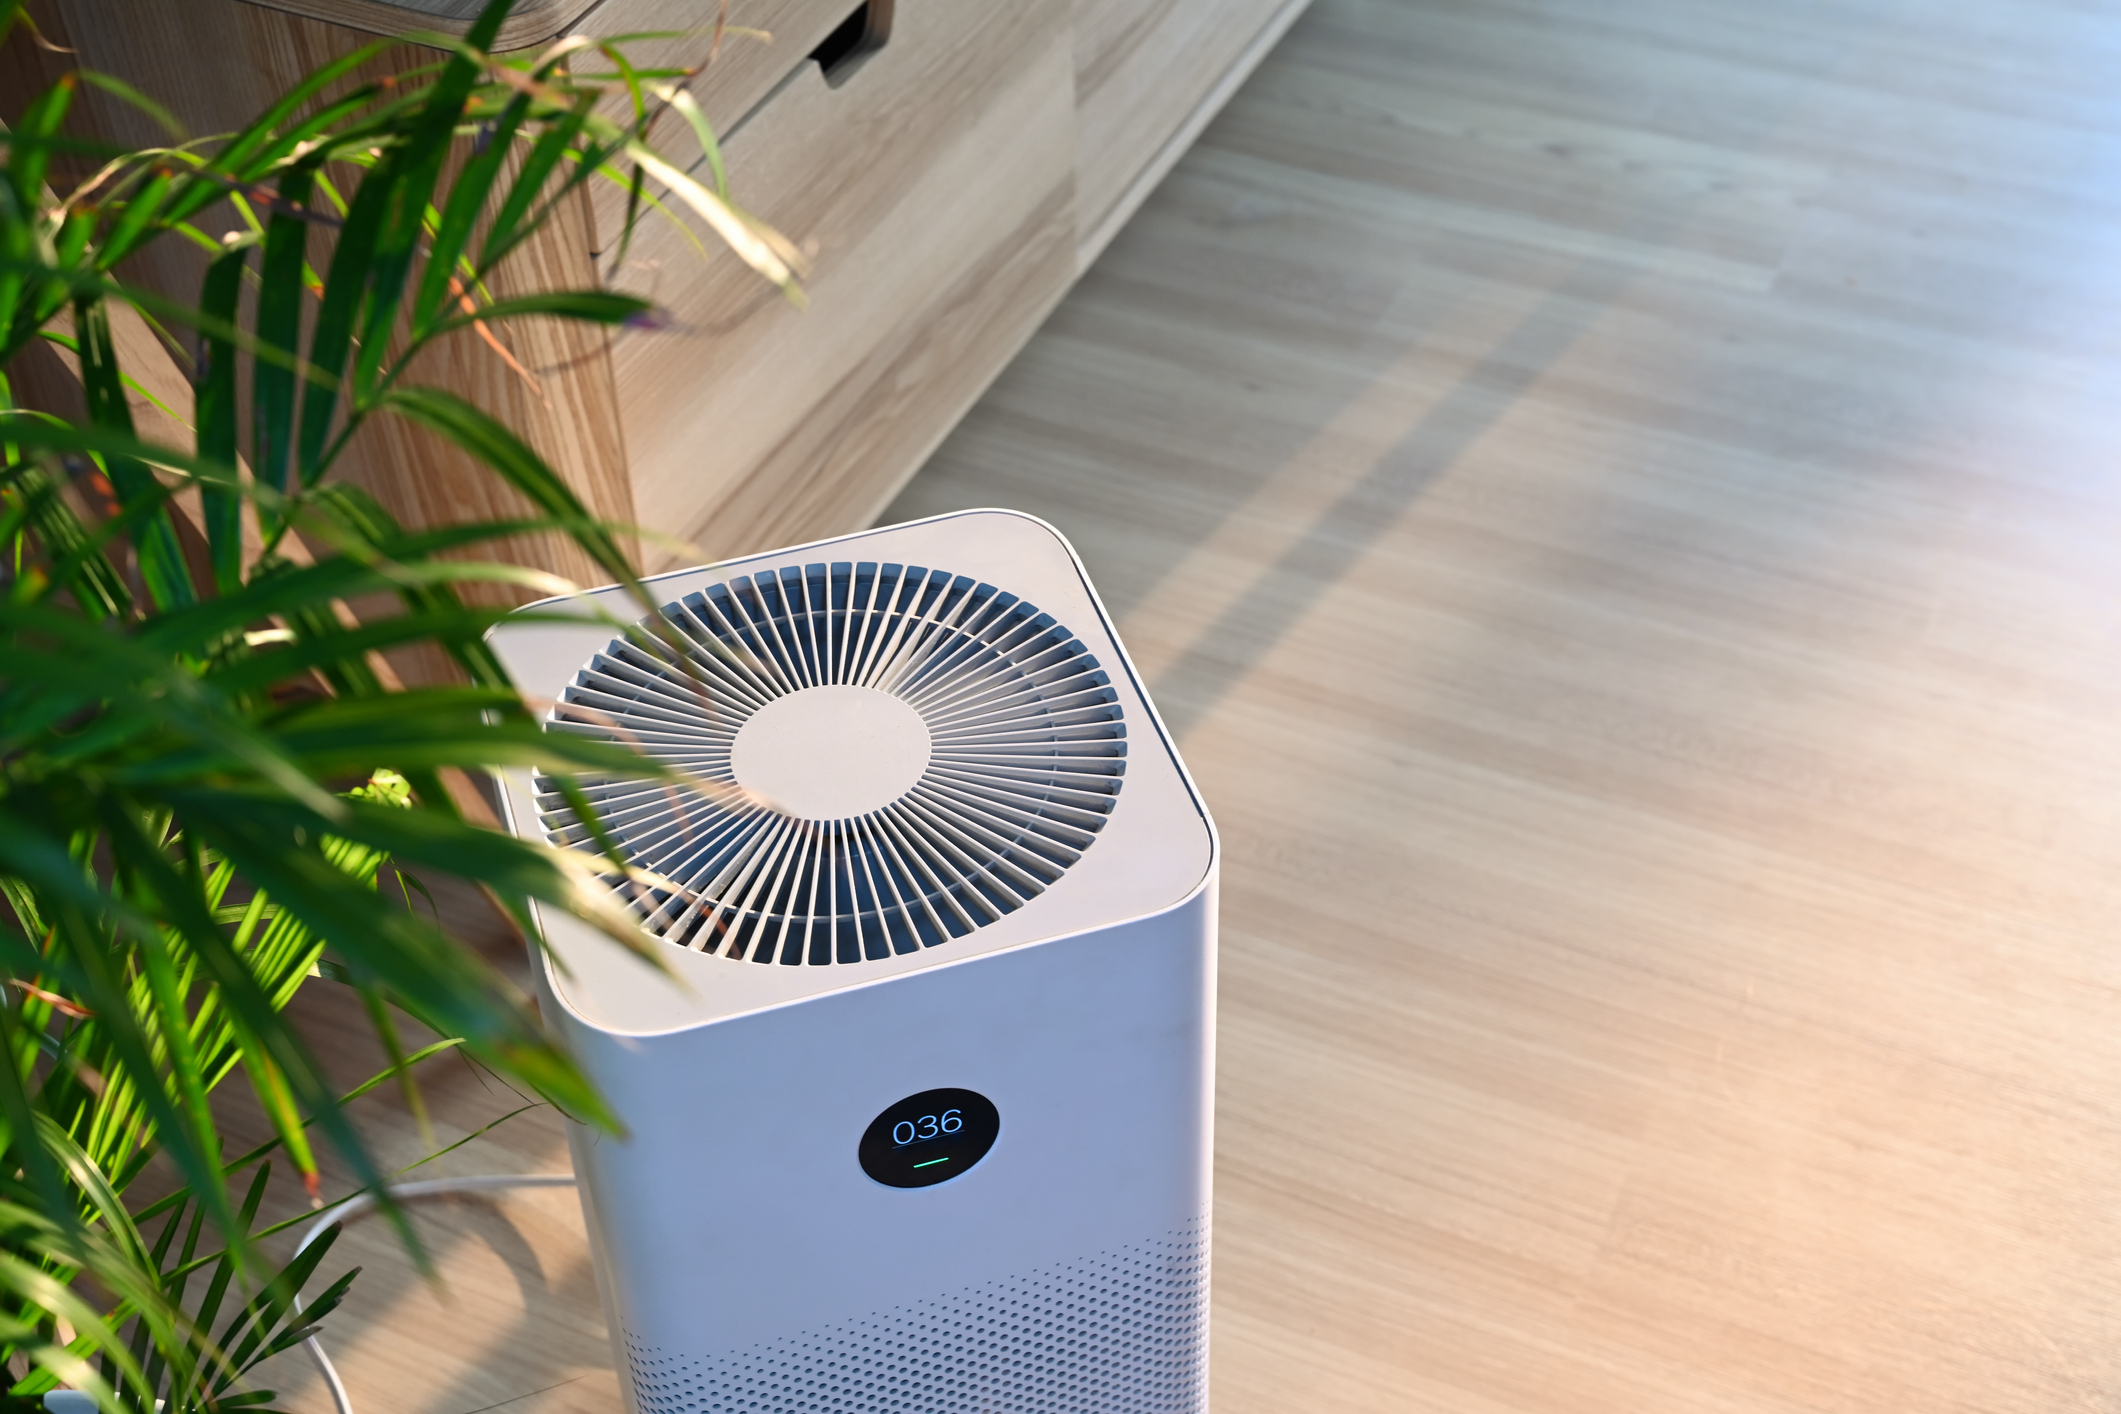 Air purifier in a room surrounded by a plant and a dresser